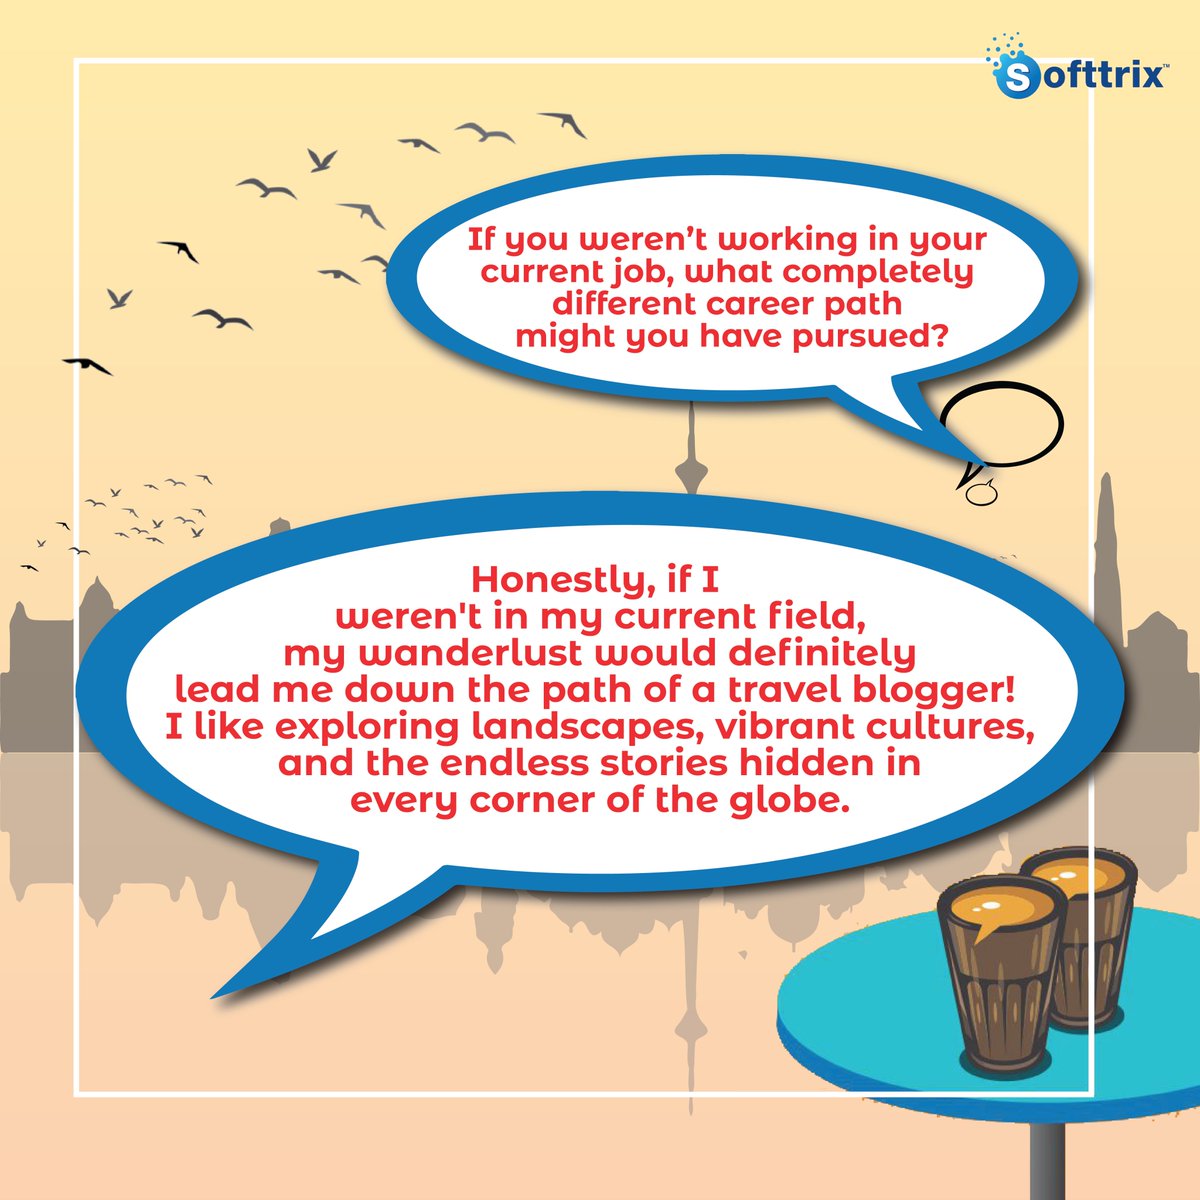 चाय पर चर्चा| ☕
Spilled tea and side-splitting laughter?  That's just another day at the office!   Recently, we had a blast catching up with Harpreet Singh over tea.

#ChaiPeCharcha #MeetTheTeam #TeamworkMember #DesiVibes #GetToKnowUs #Softtrix #BehindTheScenes  #Conversations